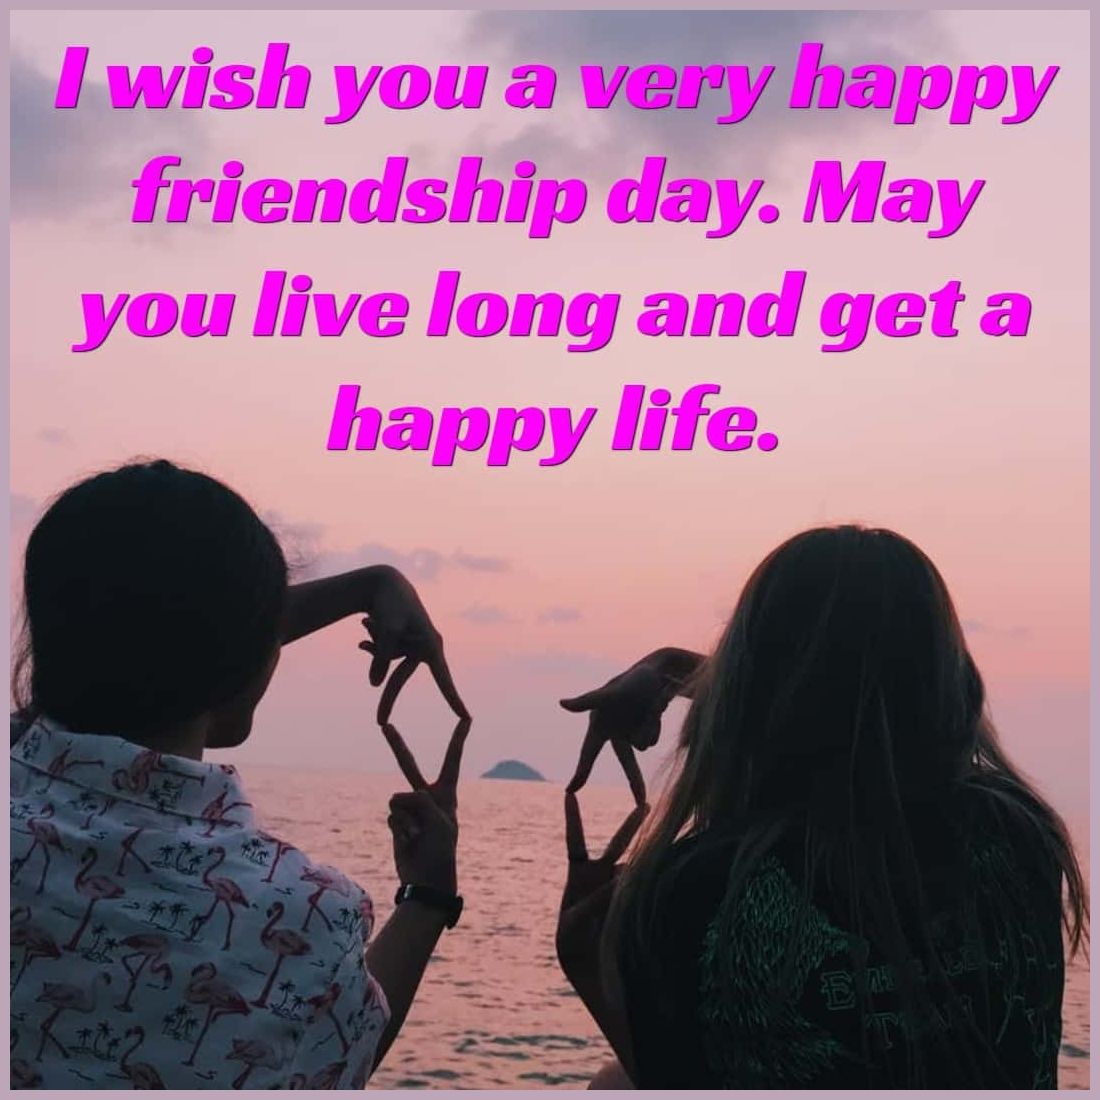 Happy Friendship Day 2020 HD Images, Images, HQ Photos, 4K ...